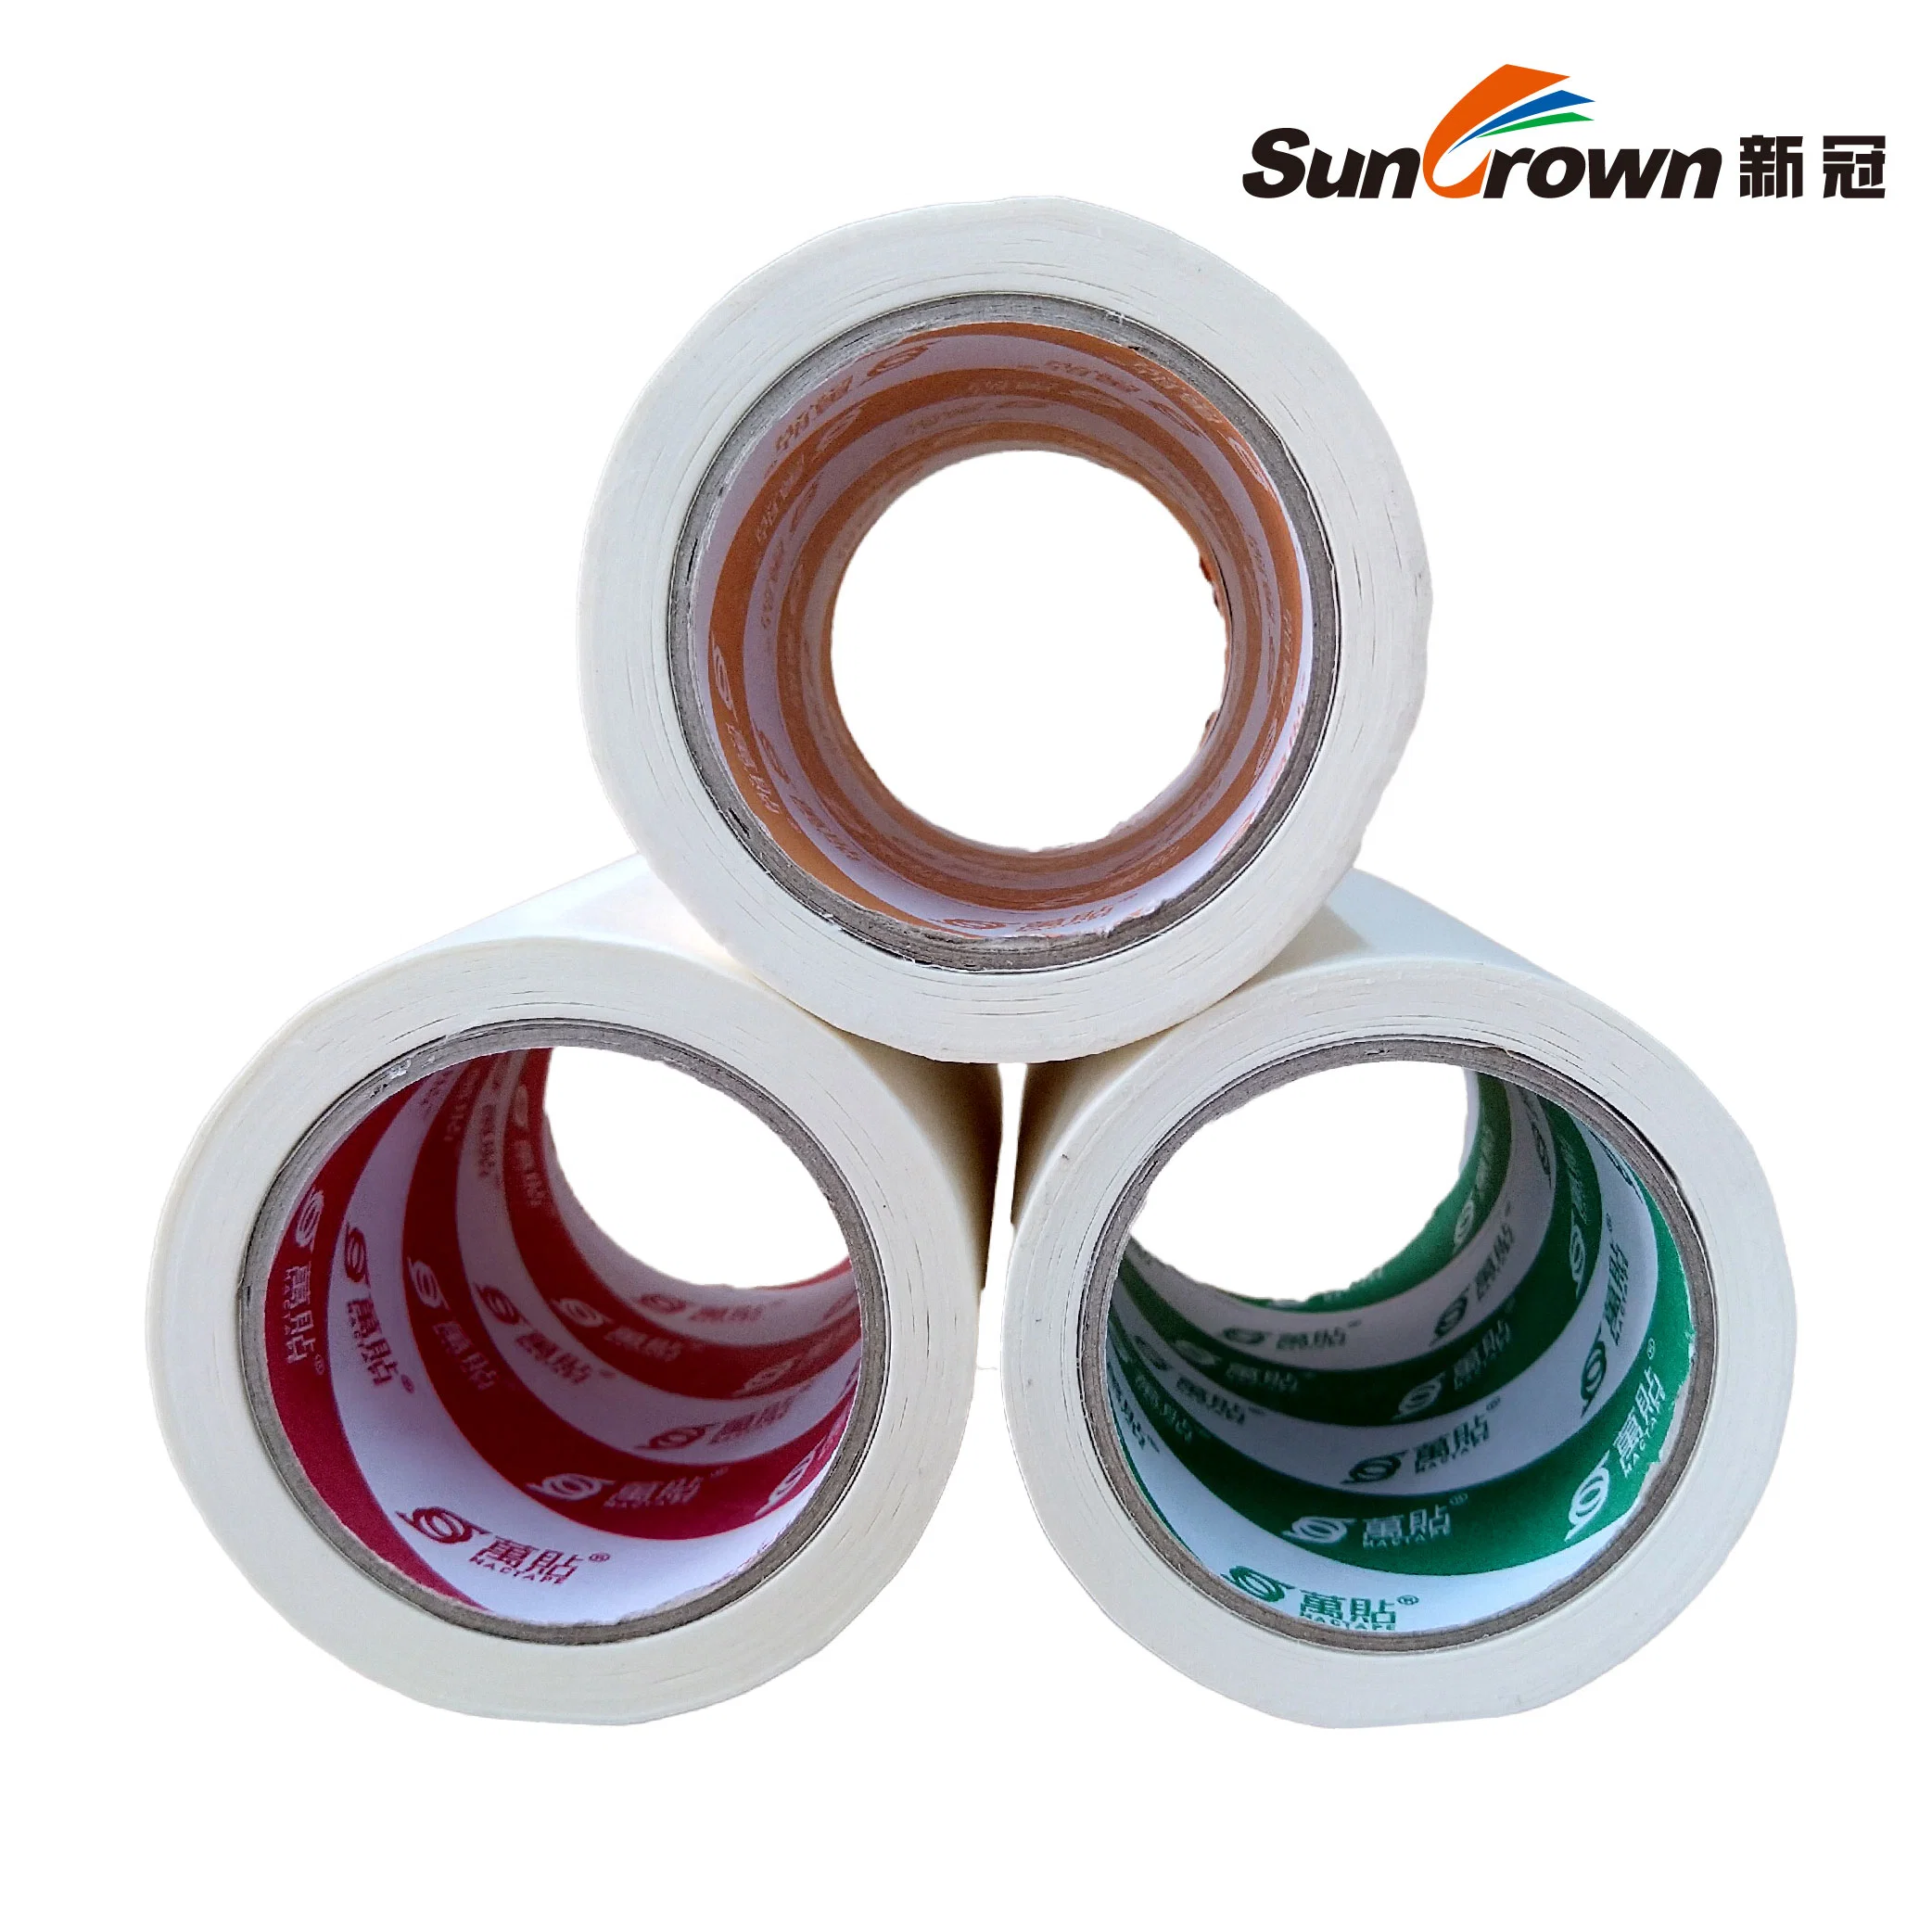 Suncrown Position Tape for Adhesive Label, Car Decal and Logo Transfer